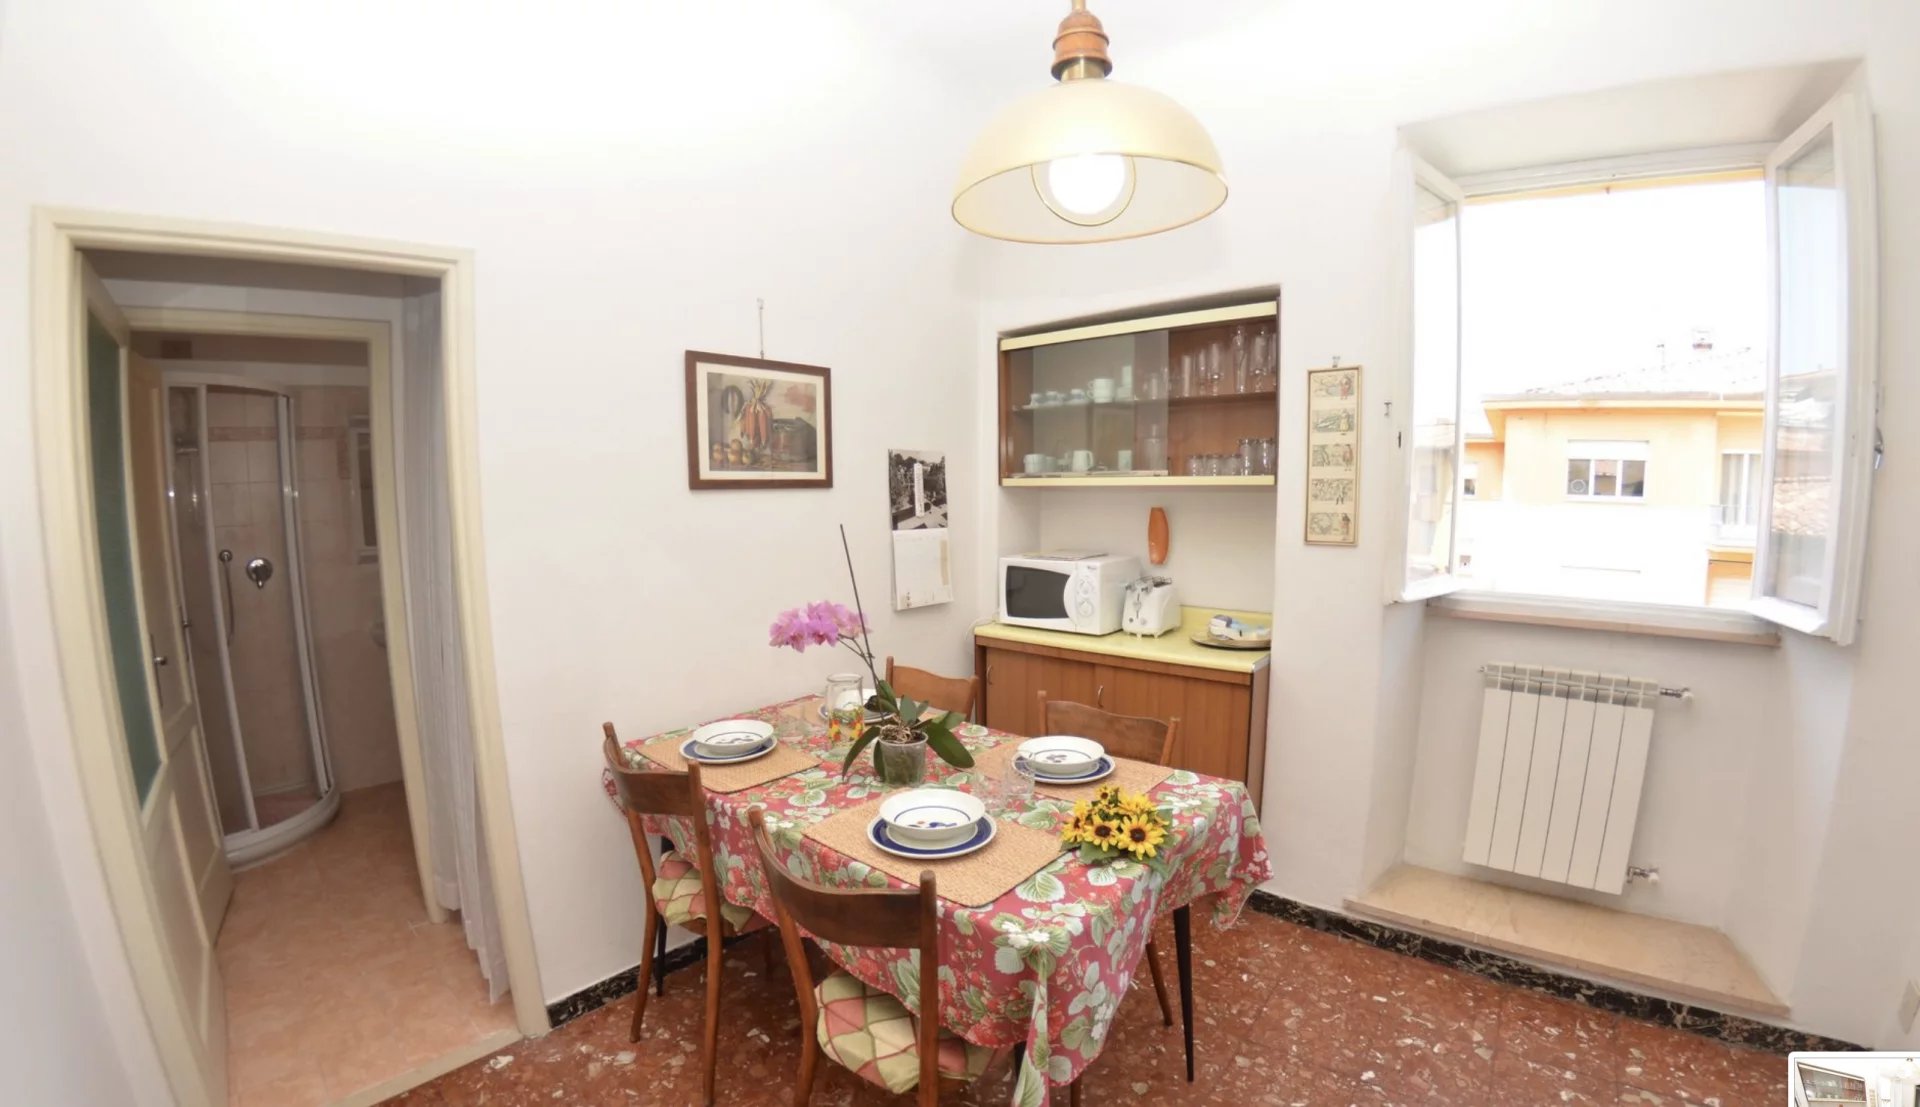 ITALY, TUSCANY, APARTMENT IN LUCCA, UP TO 560€ PER WEEK, FOR 4 PERSONS, BAGNI DI LUCCA